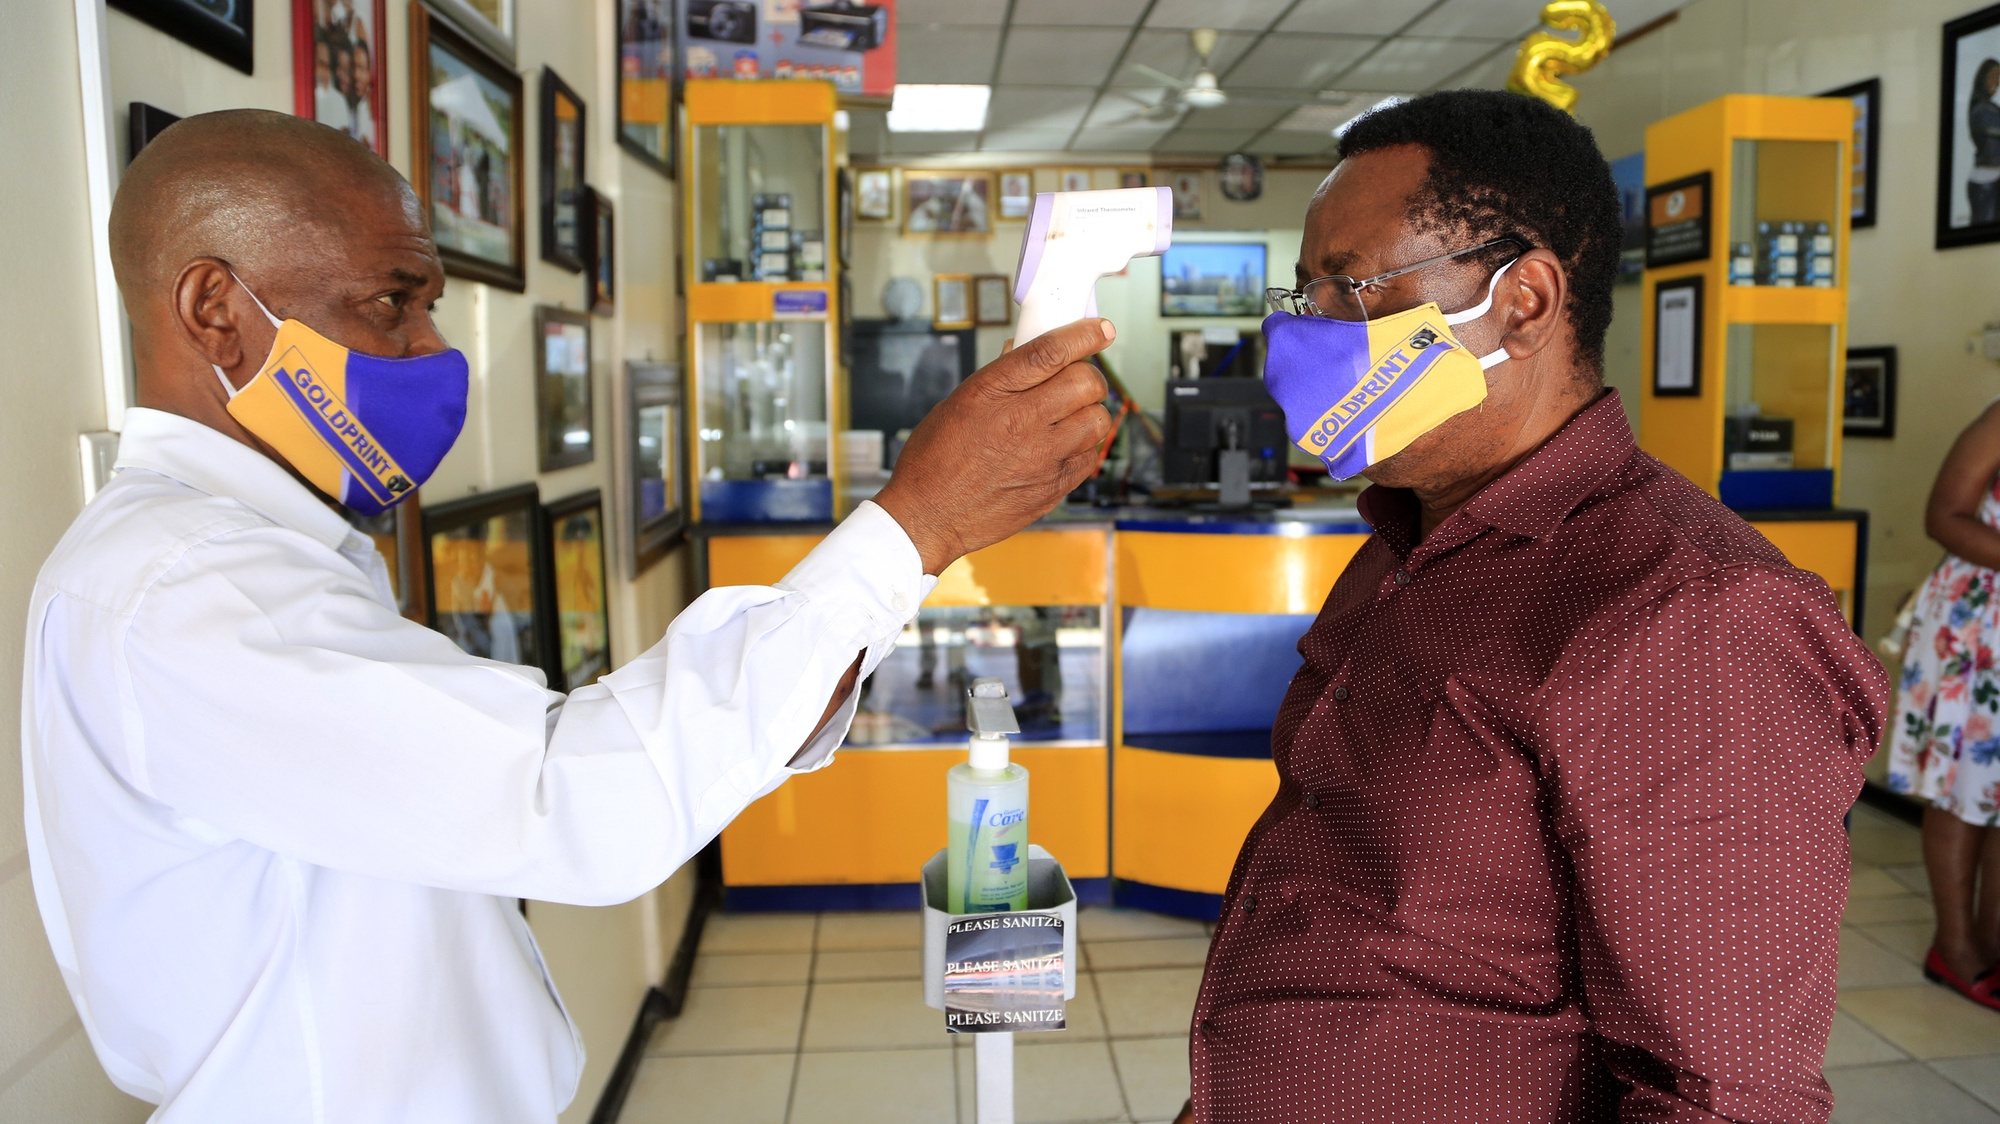 epa08757350 A man has his skin temperature checked in a shop Harare, Zimbabwe, 19 October 2020. According to the World Health Organisation (WHO), Africa faces a reality check in its fight against the coronavirus pandemic as cases and deaths rise after easing lockdowns and travel restrictions. The continent has seen an increase in weekly Covid-19 cases.  EPA/AARON UFUMELI